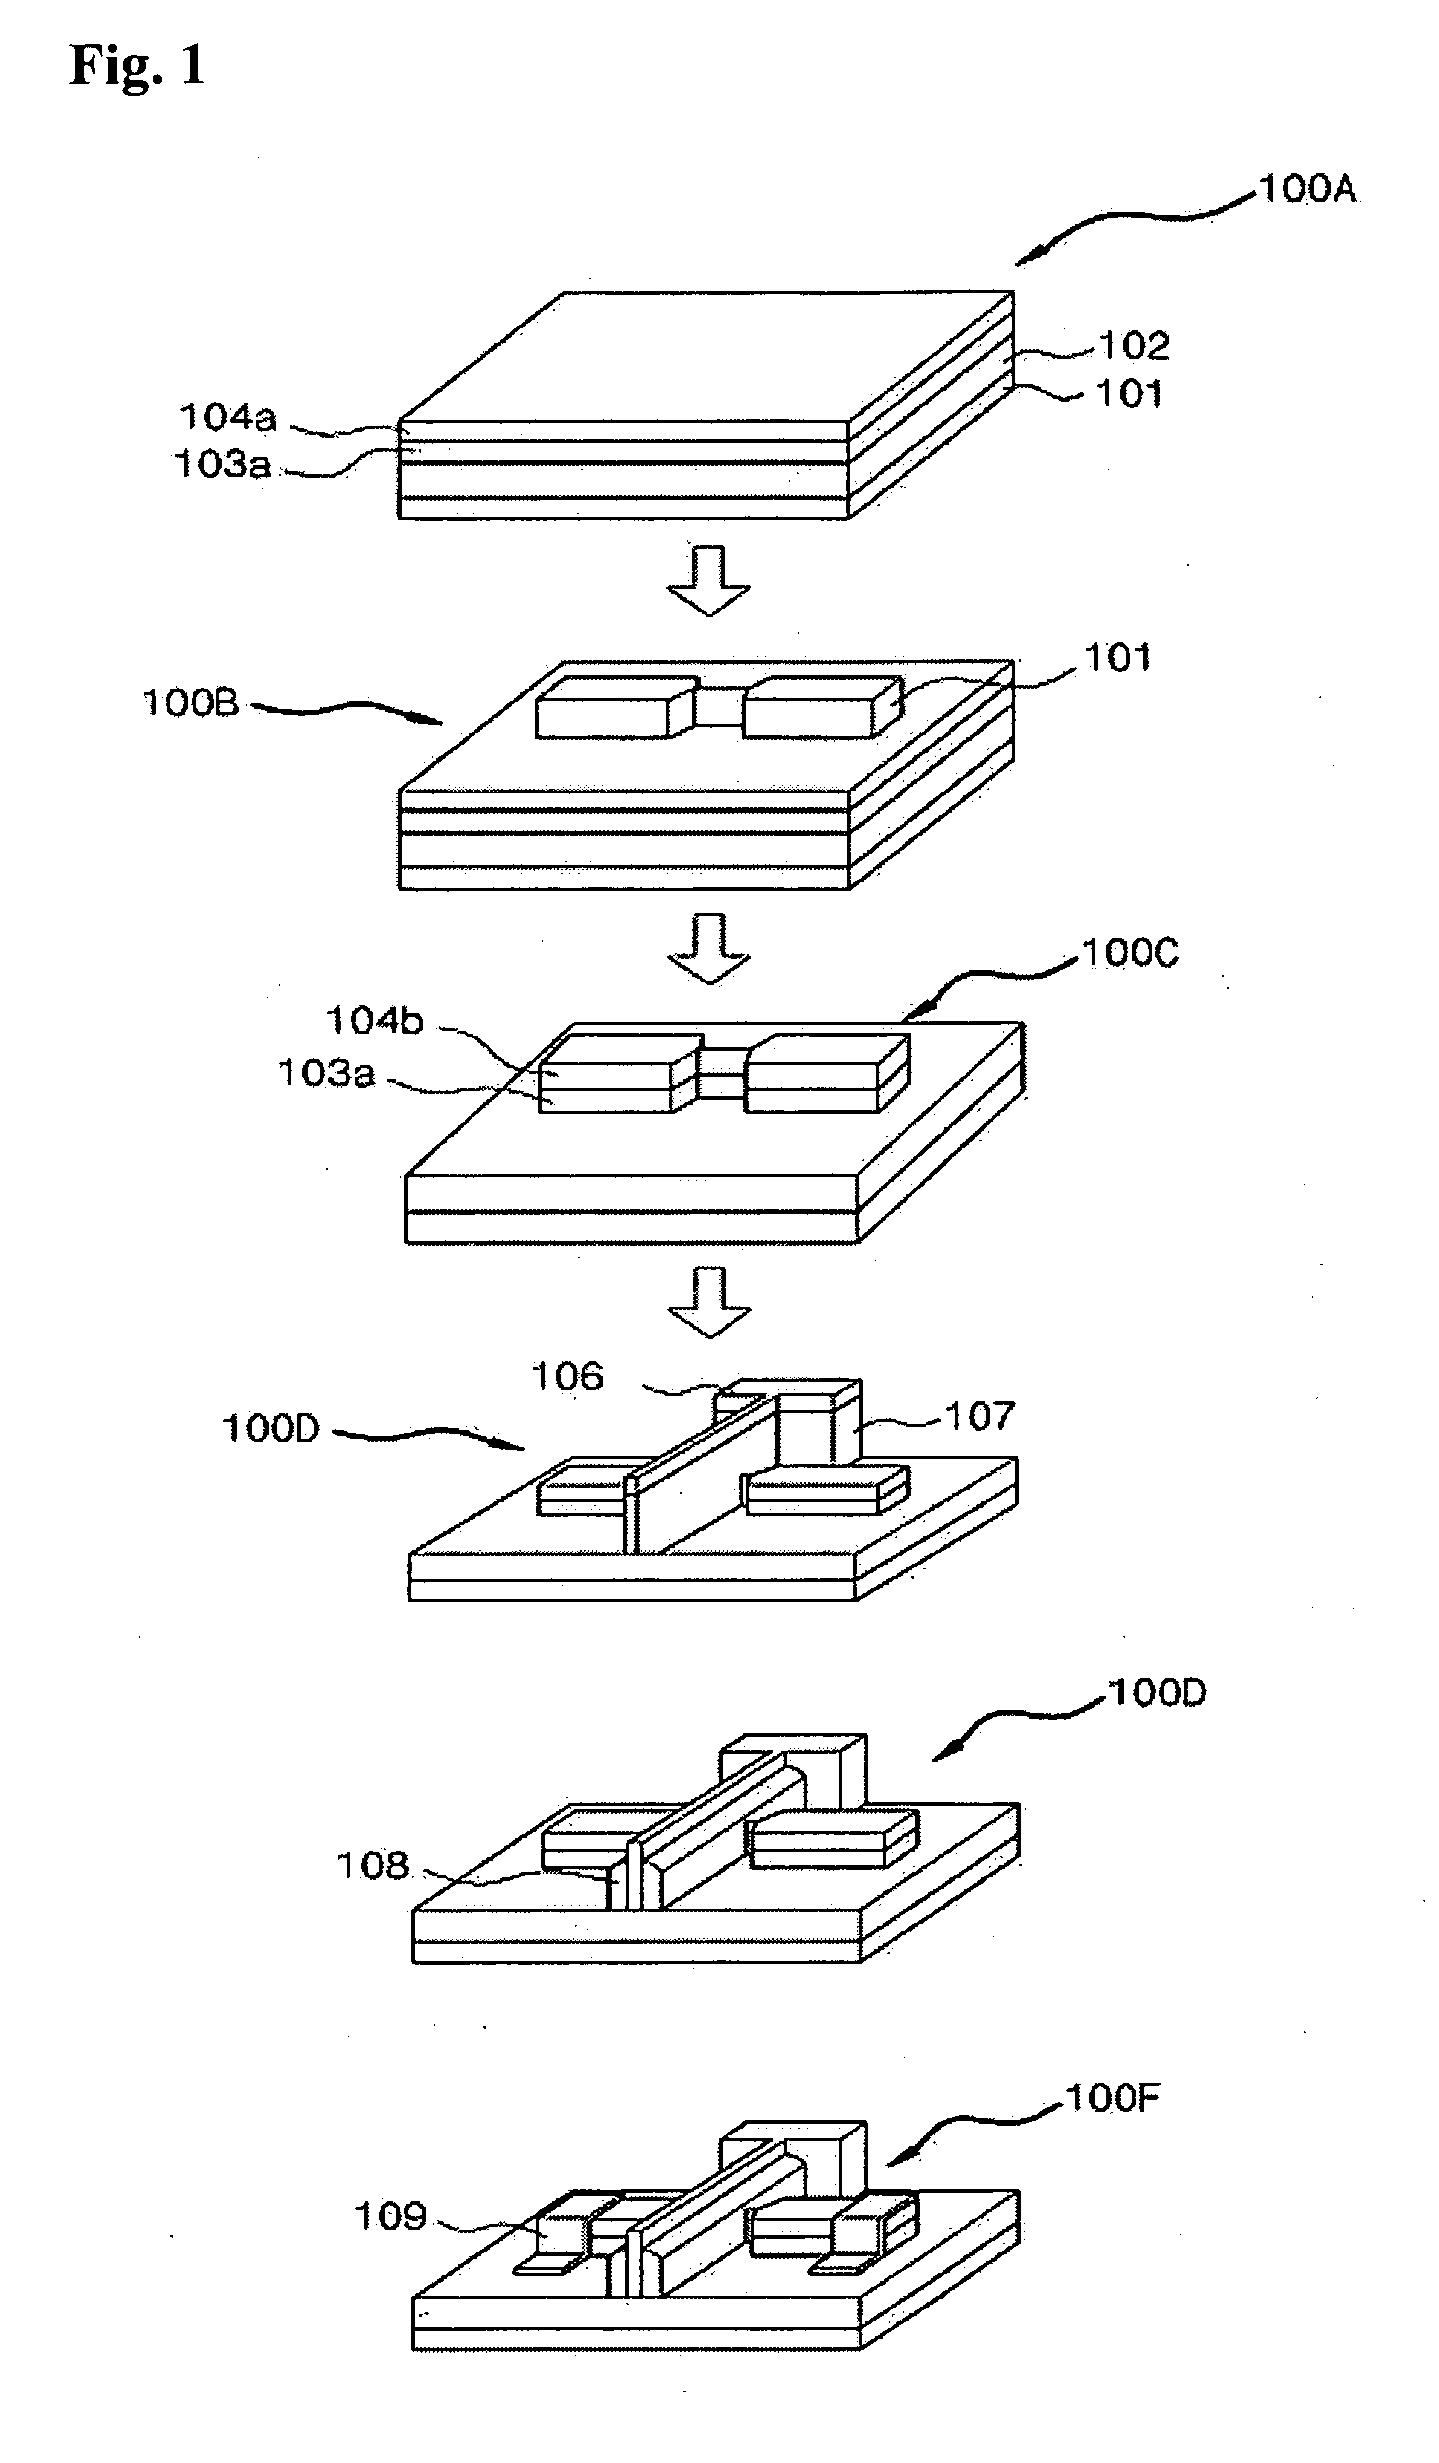 Method for manufacturing field effect transistor having channel consisting of silicon fins and silicon body and transistor structure manufactured thereby